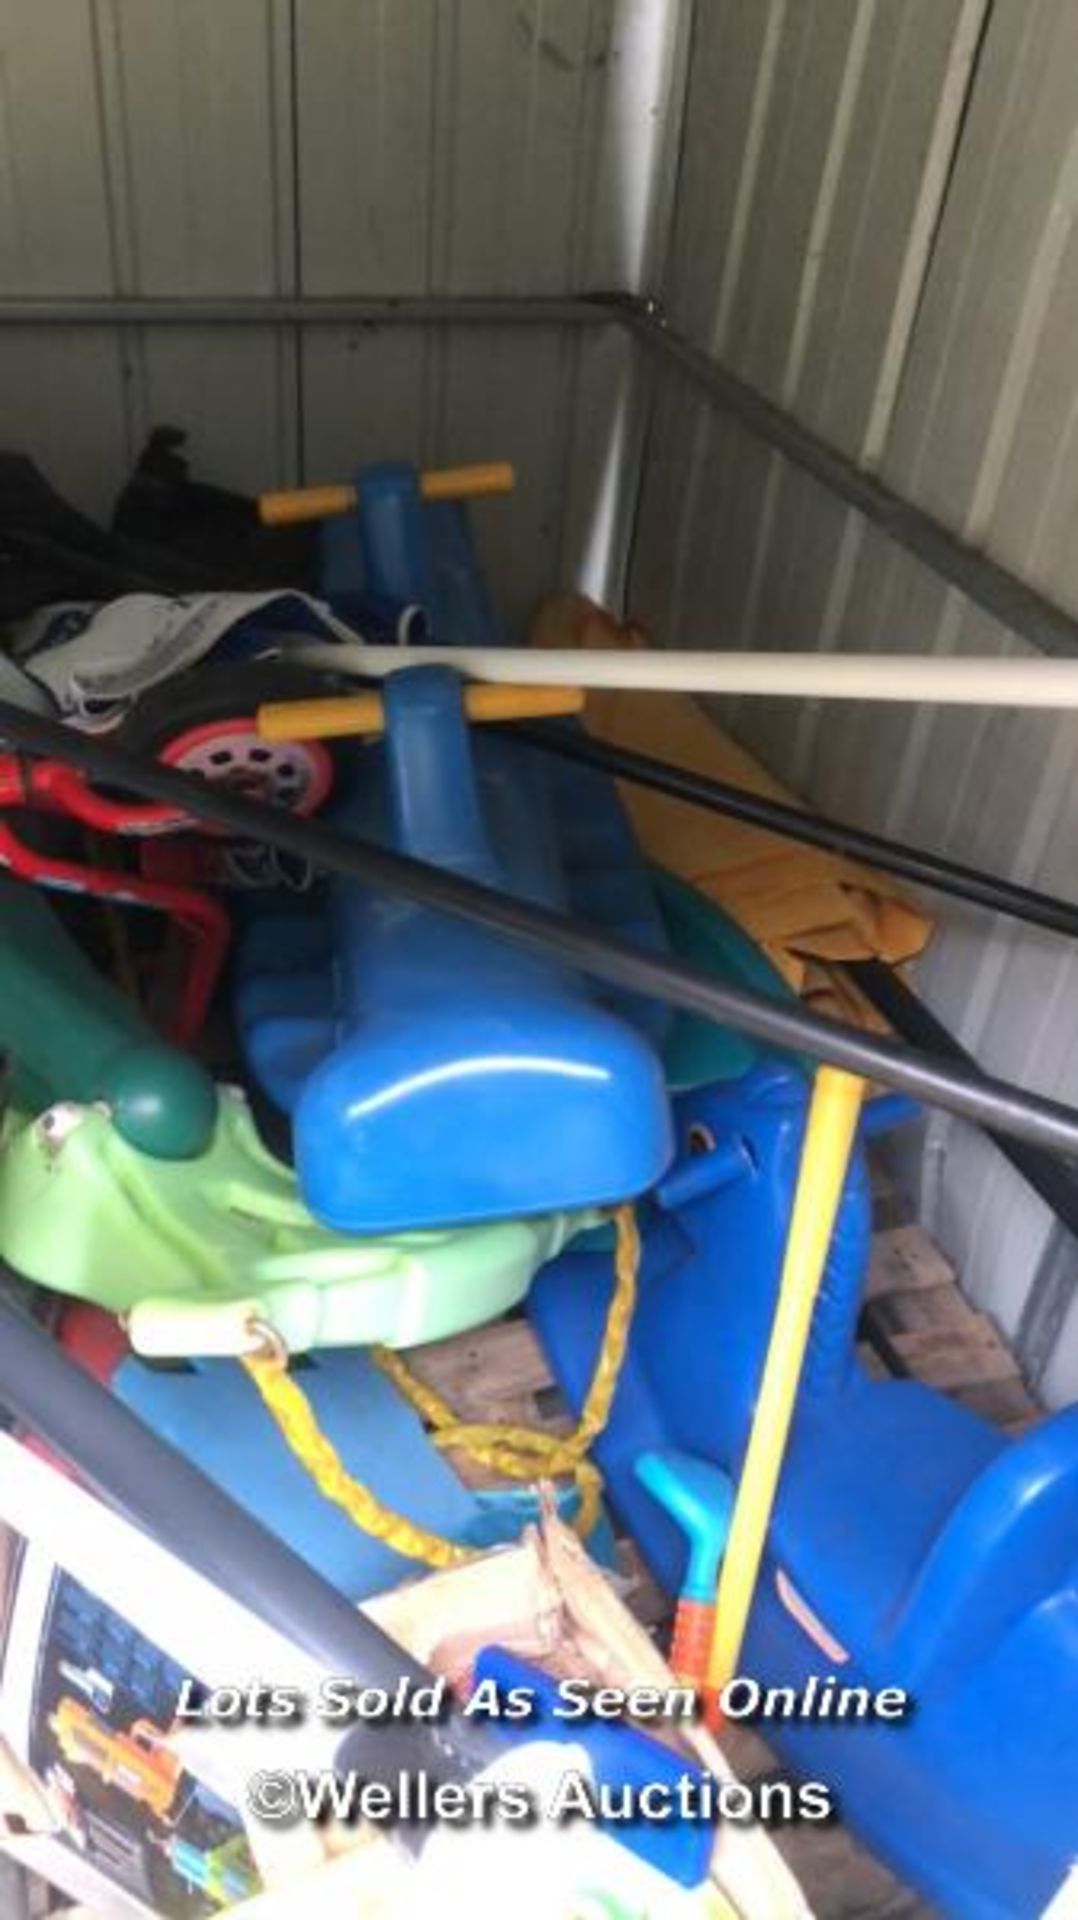 CONTENTS OF SHED INCL. CHILDREN'S TOYS, LADDER, GARDEN PARASOL UMBRELLAS, HUSQVARNA MOWER, LARGE - Image 3 of 6